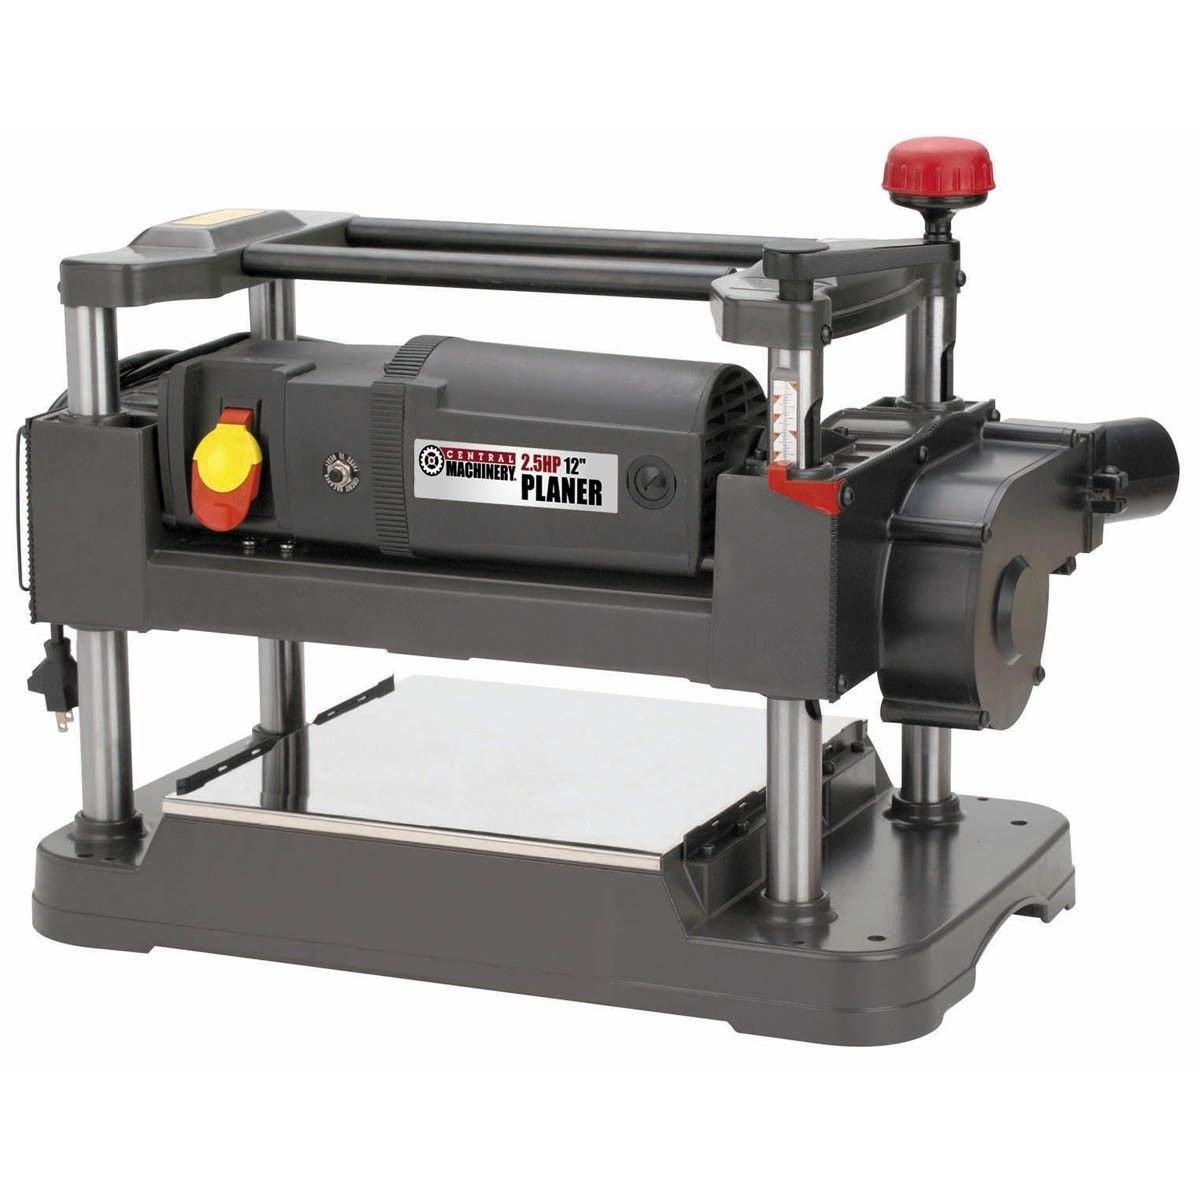 What does a thickness planer do?